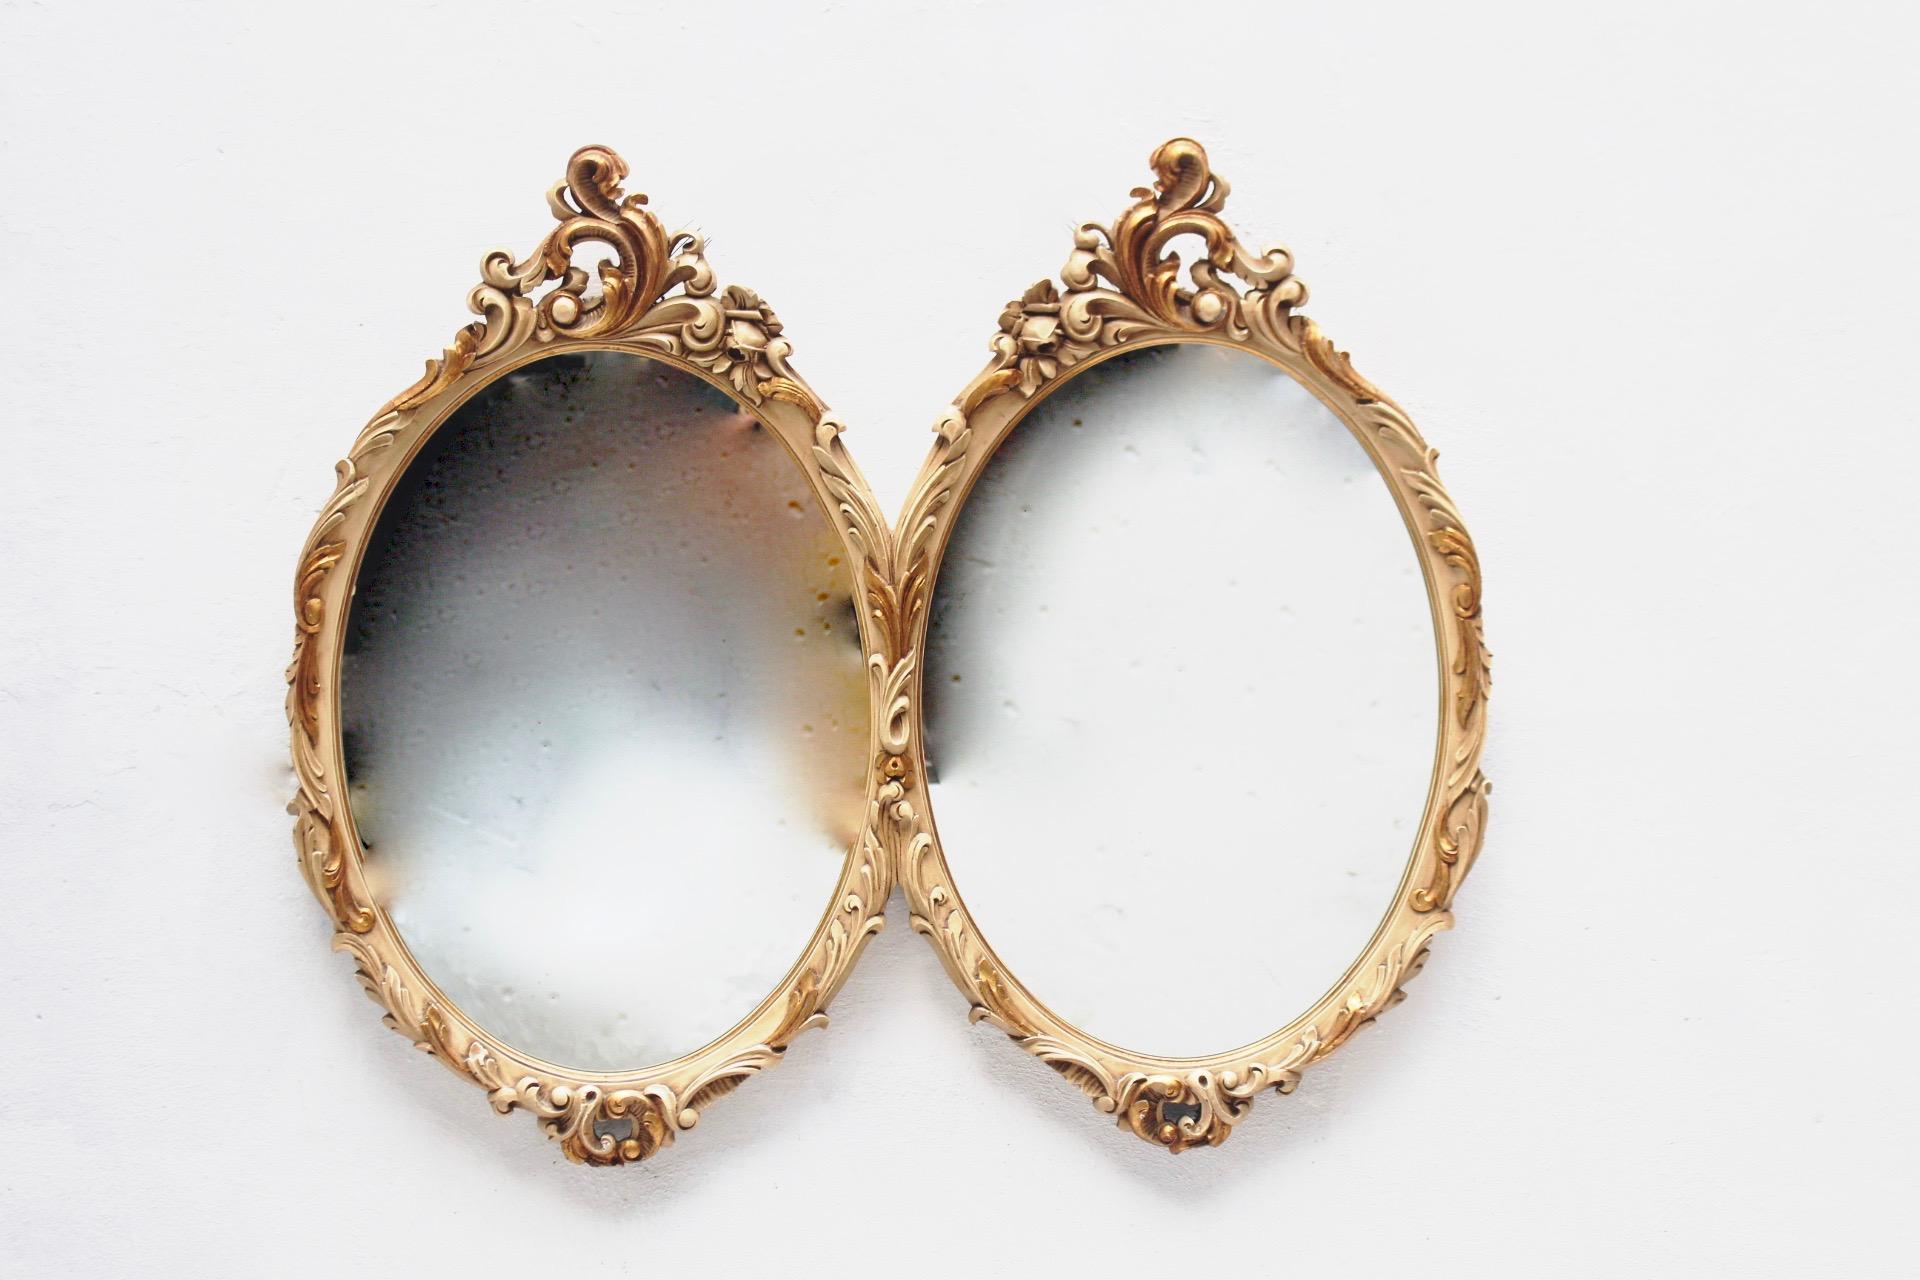 Spanish Neoclassical Revival Double Oval White Wood Mirror by Mariano García, 1960s For Sale